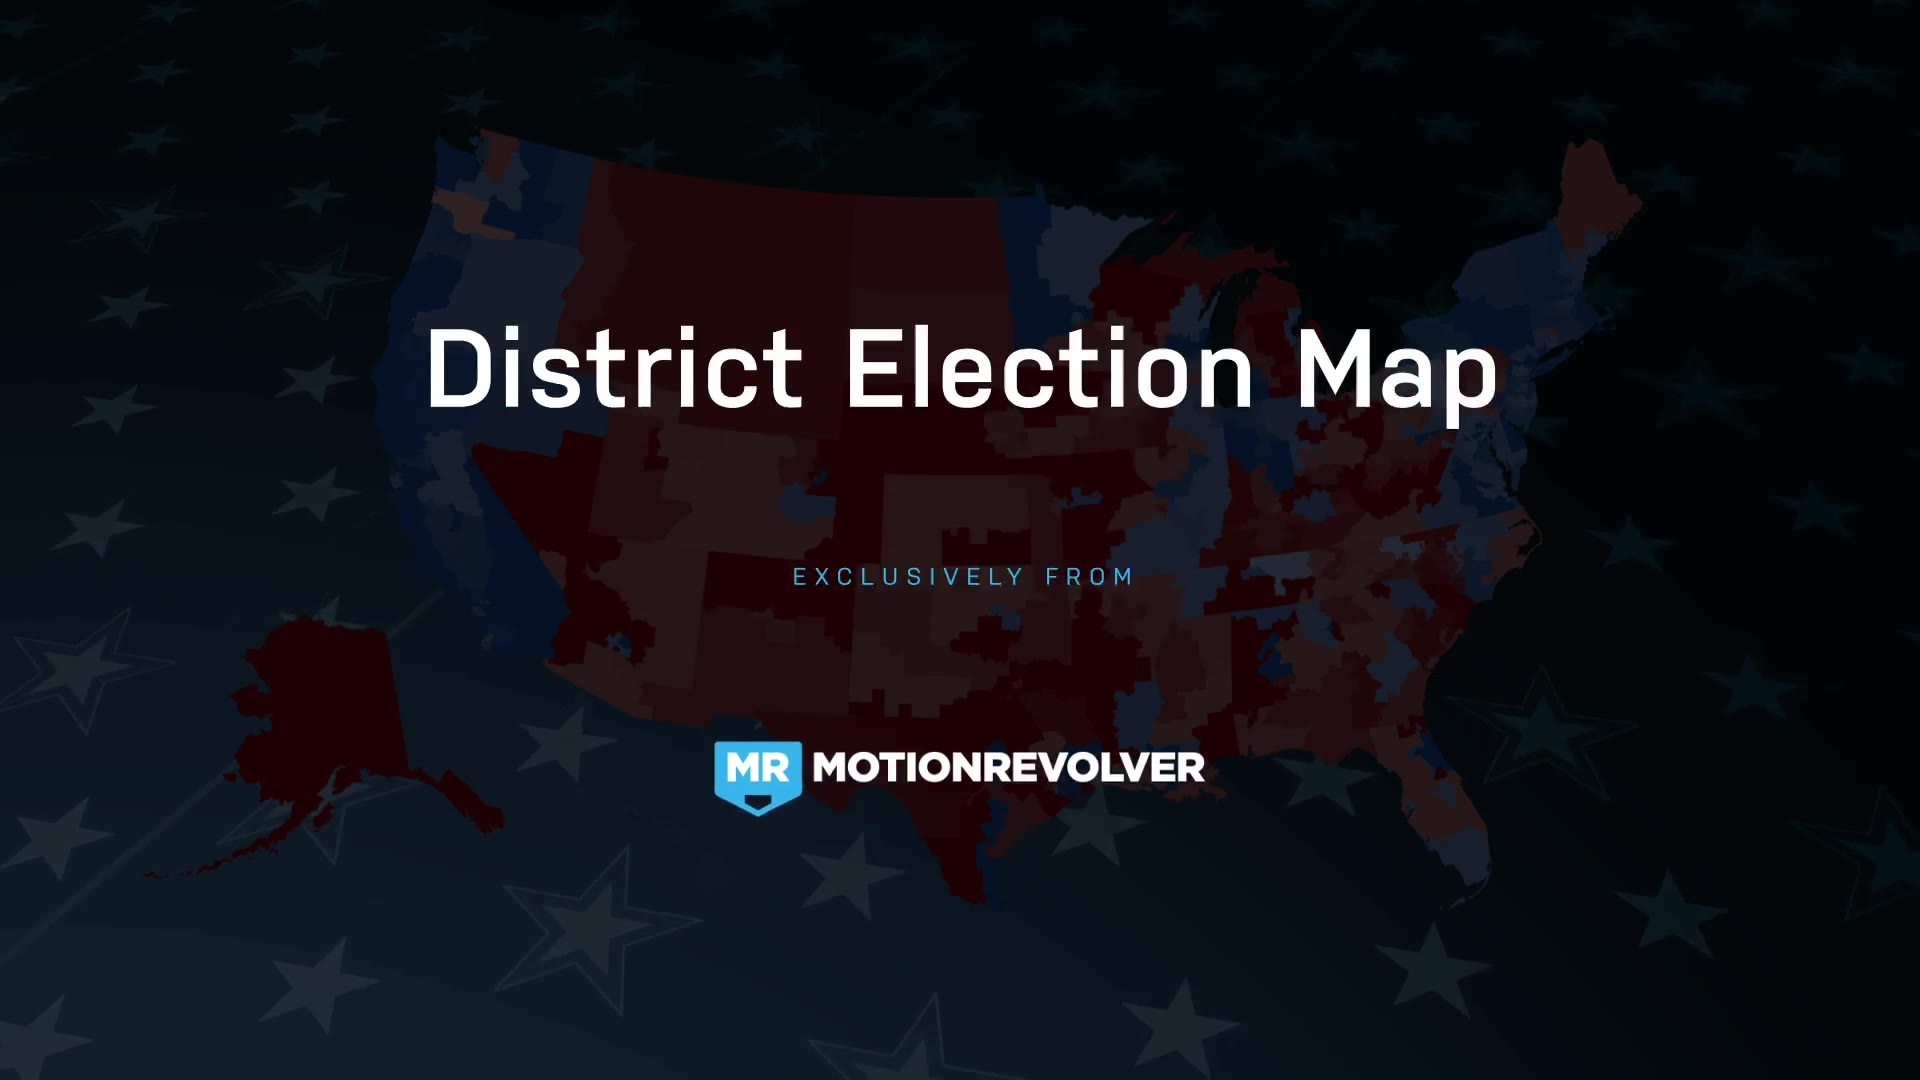 2018 midterm elections map